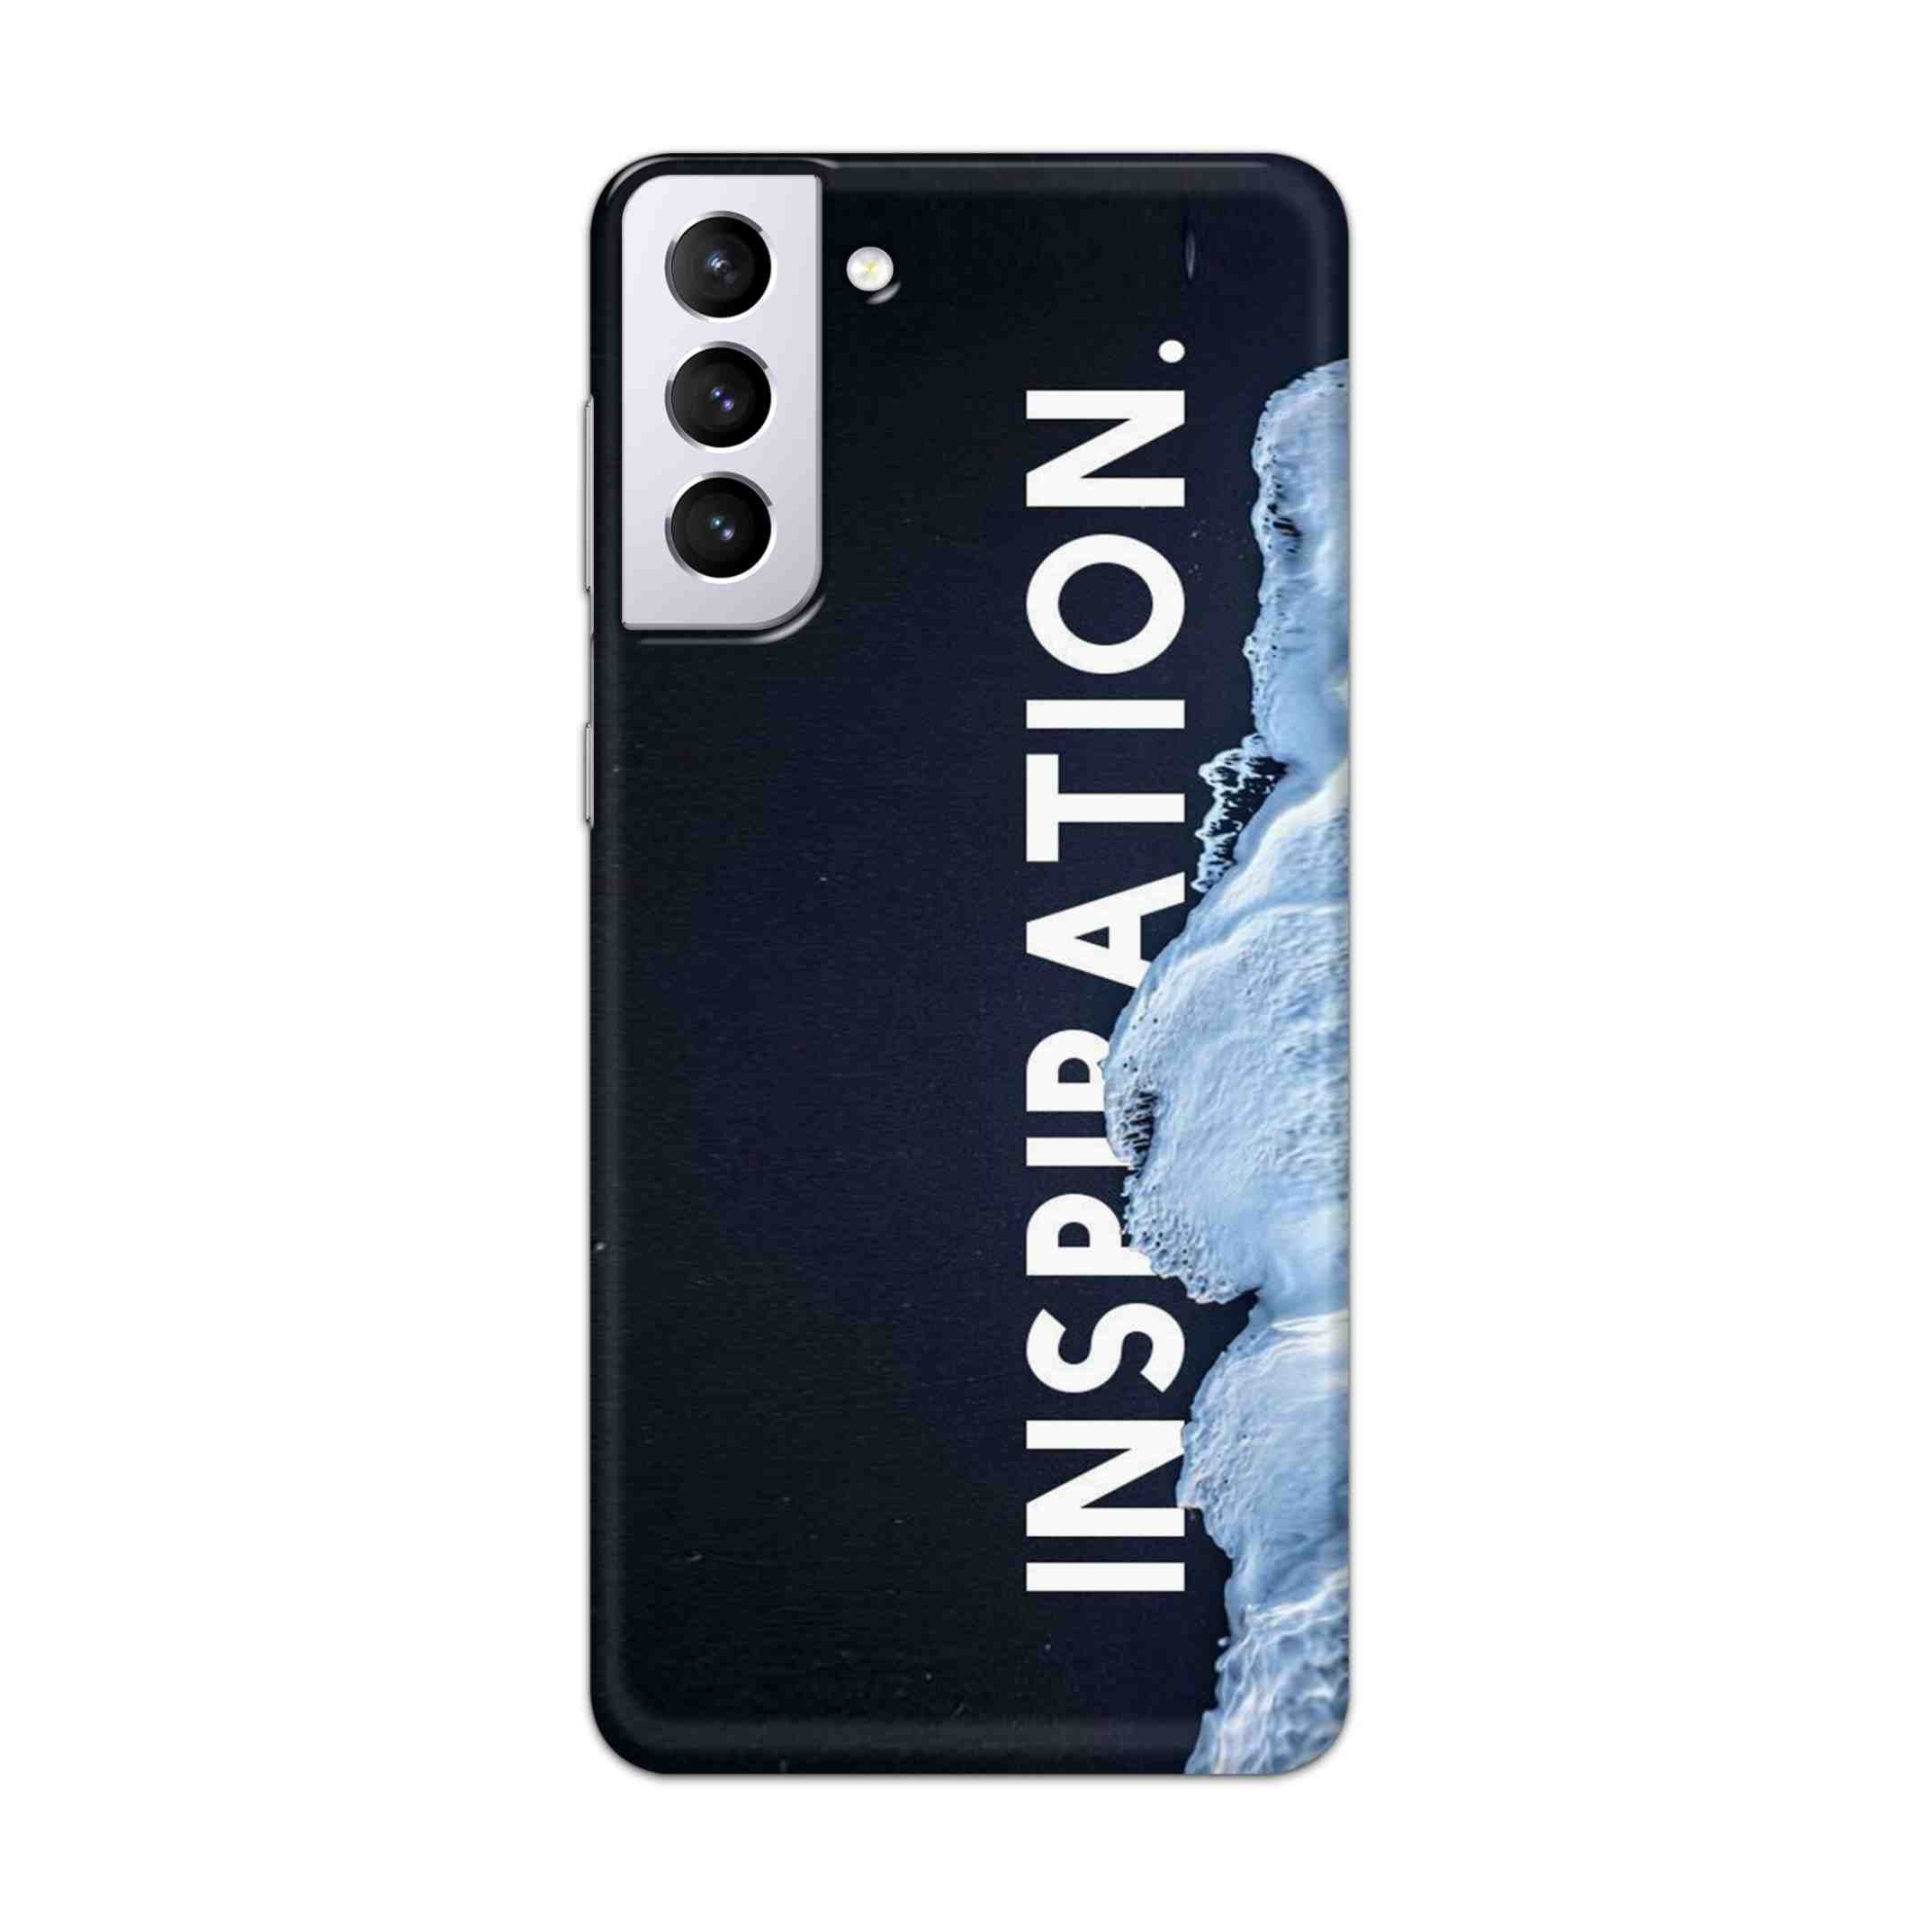 Buy Inspiration Hard Back Mobile Phone Case Cover For Samsung Galaxy S21 Online